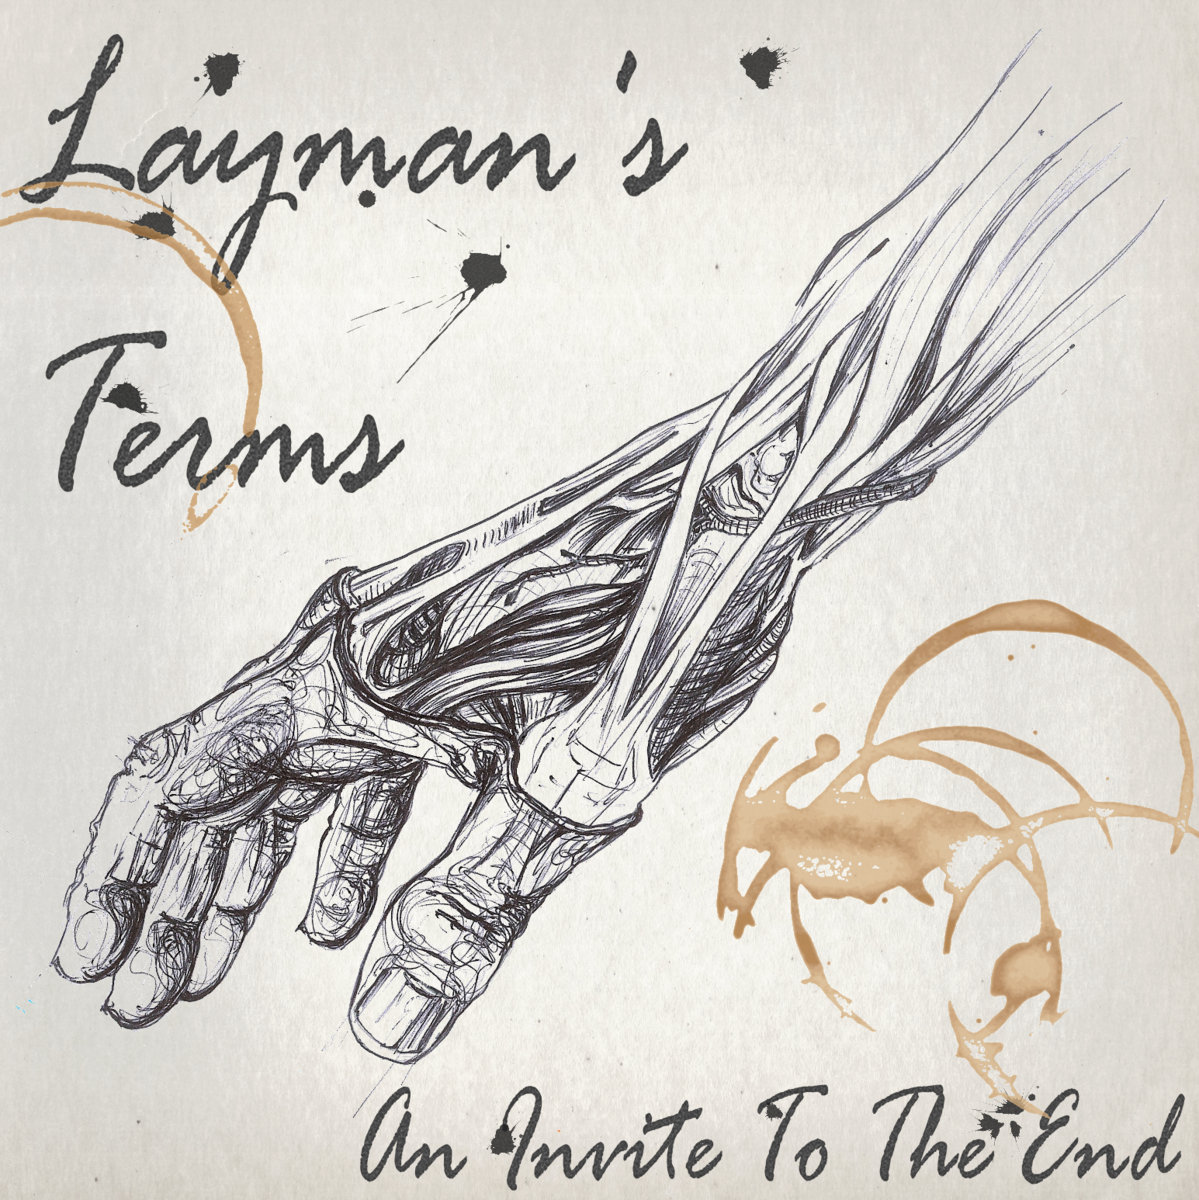 Layman's Terms - 'An Invite To The End'.